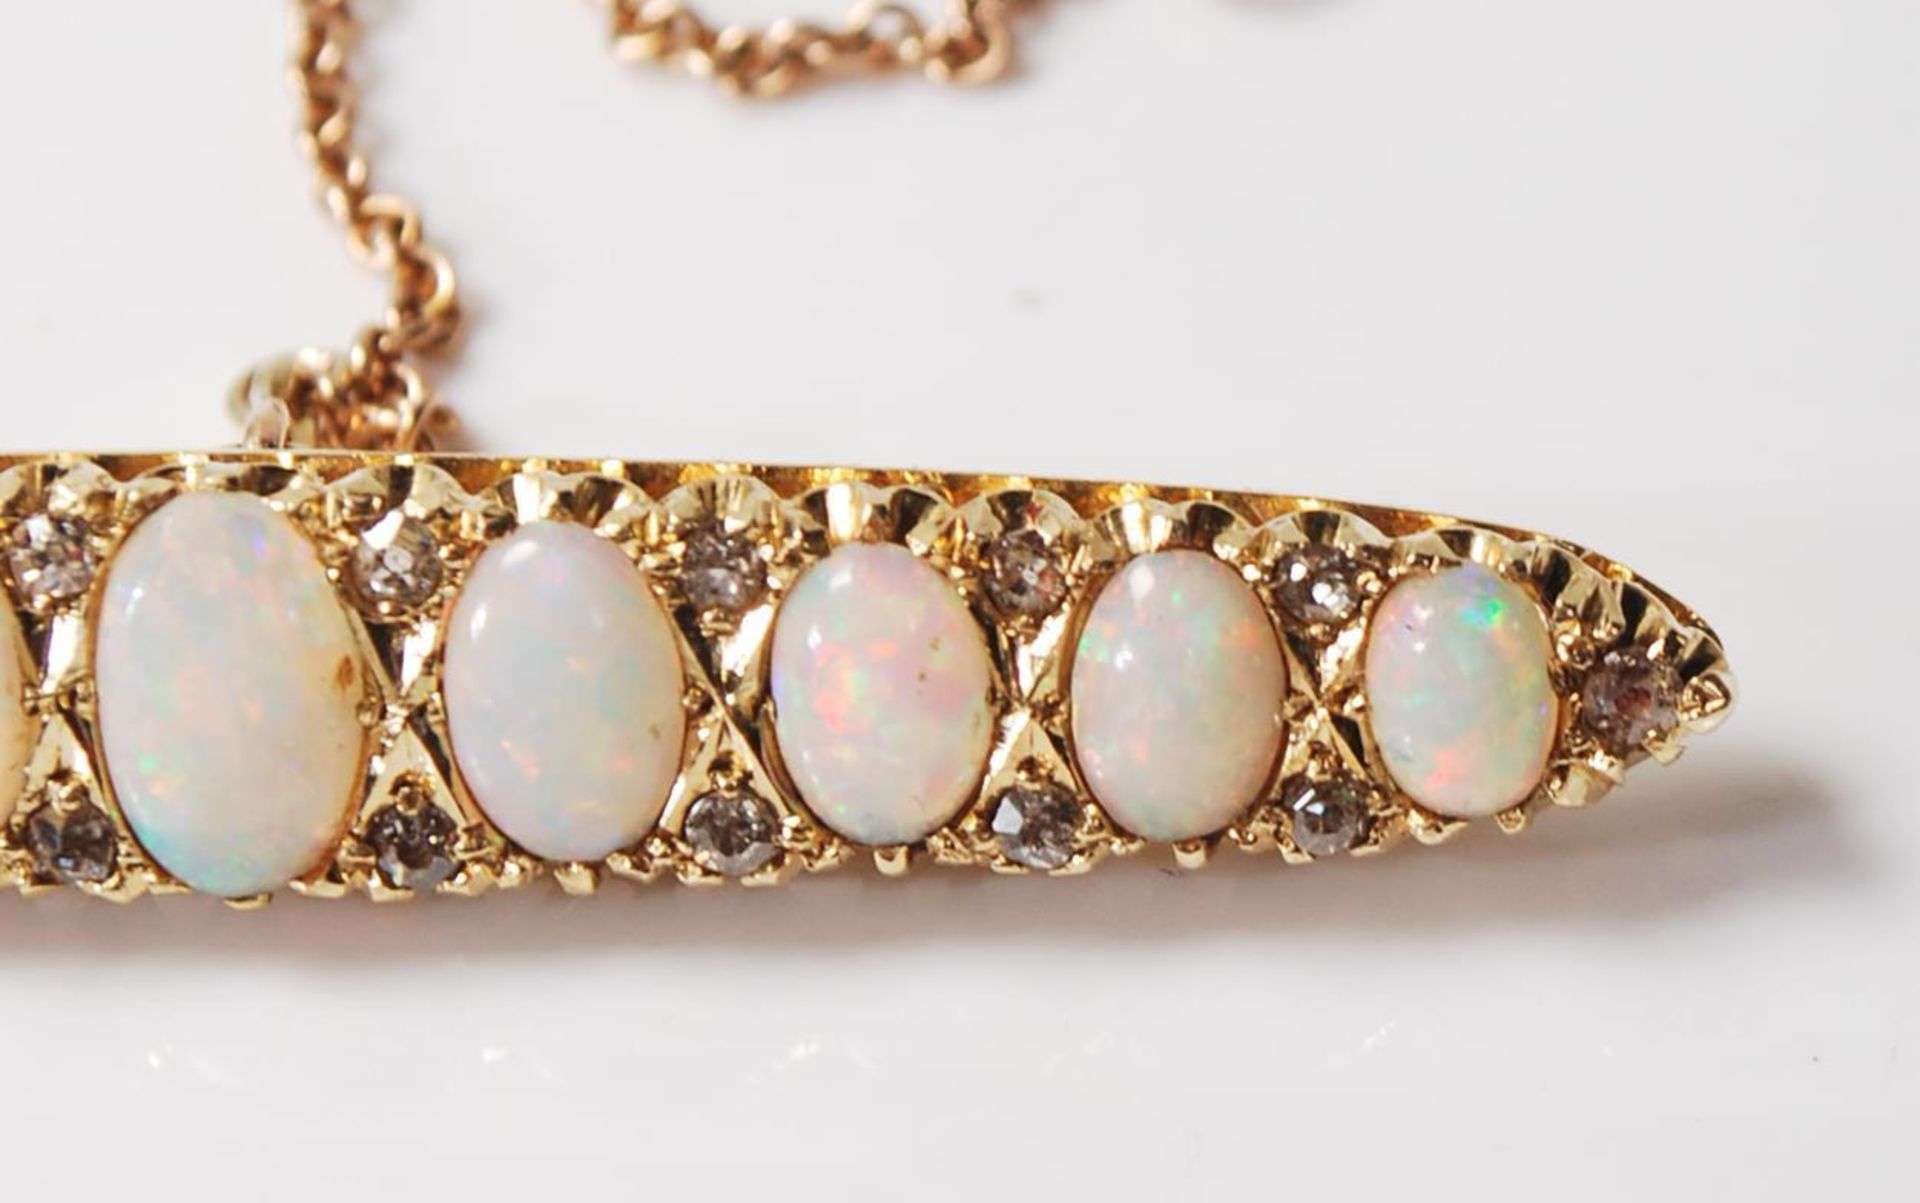 ANTIQUE 15CT GOLD OPAL AND DIAMOND BROOCH - Image 3 of 6